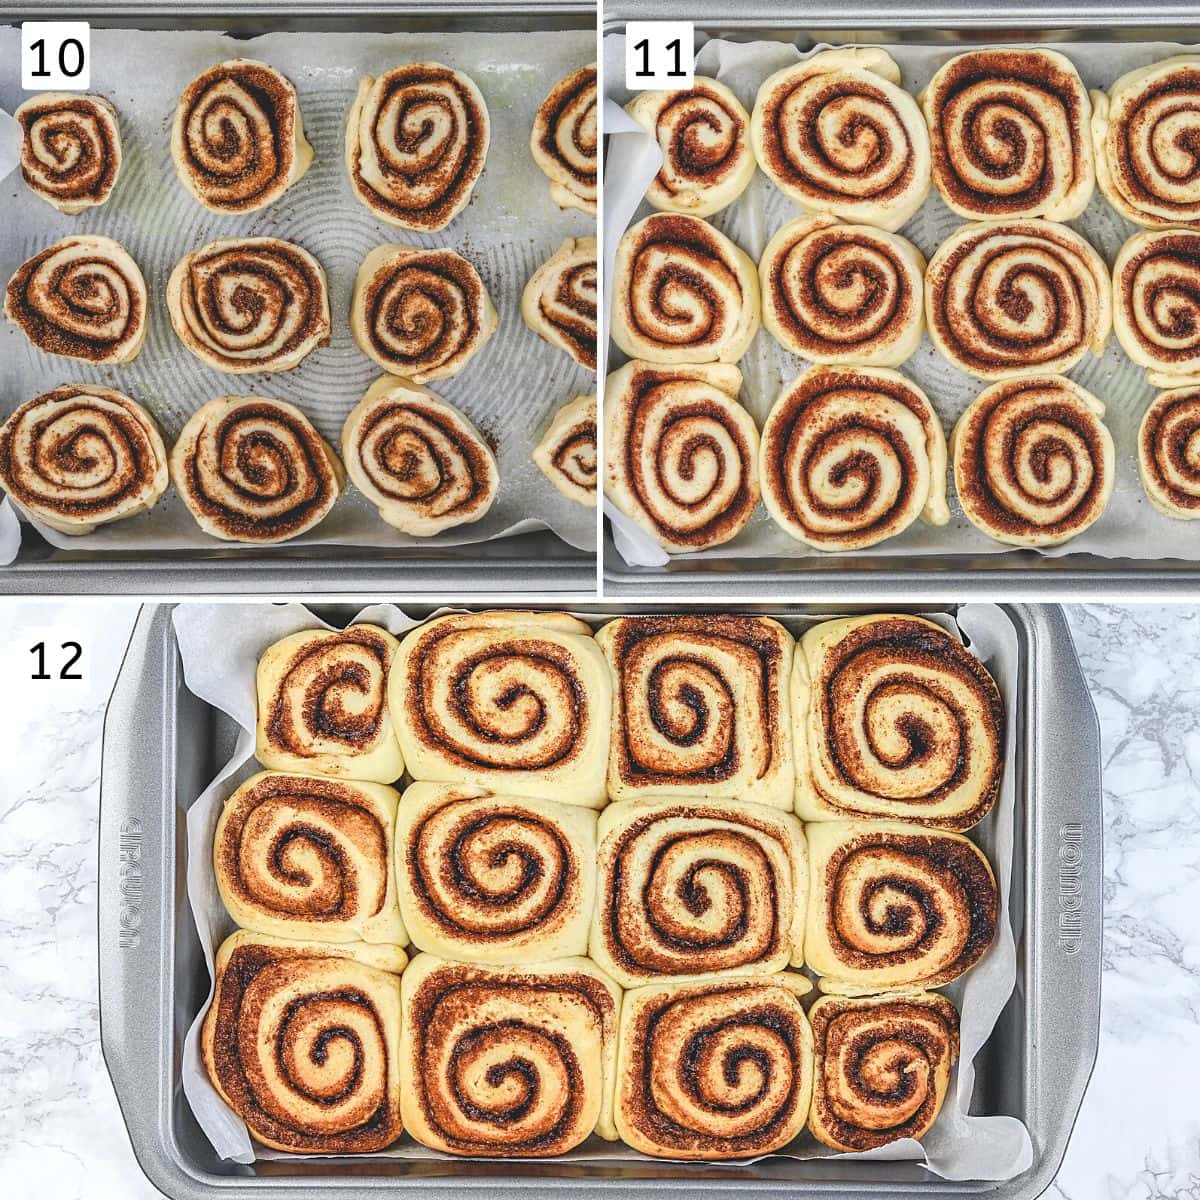 Collage of 3 steps showing rolls in a baking tray, 2 rise of the rolls and baked rolls.